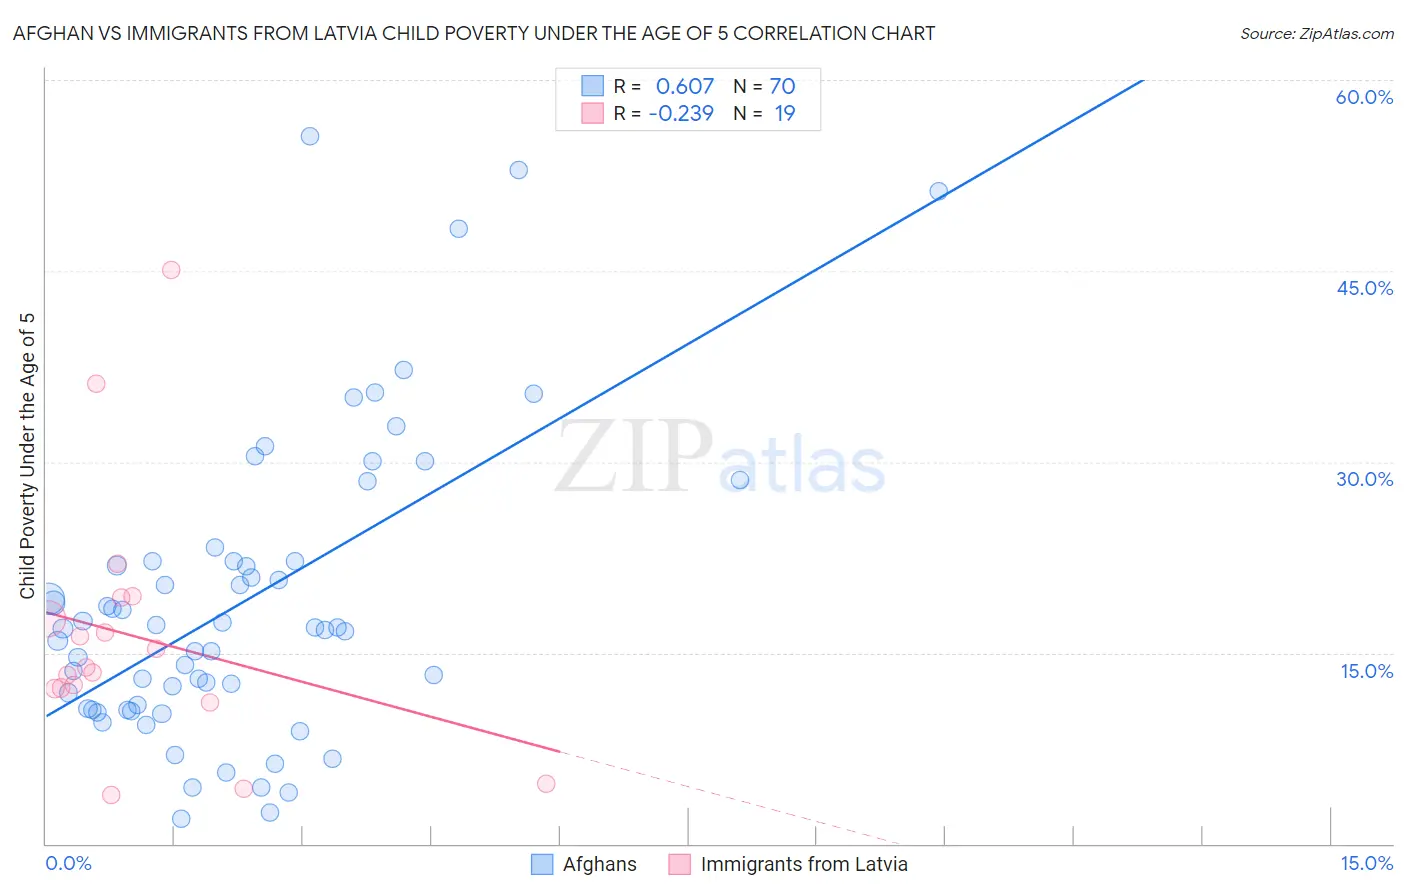 Afghan vs Immigrants from Latvia Child Poverty Under the Age of 5